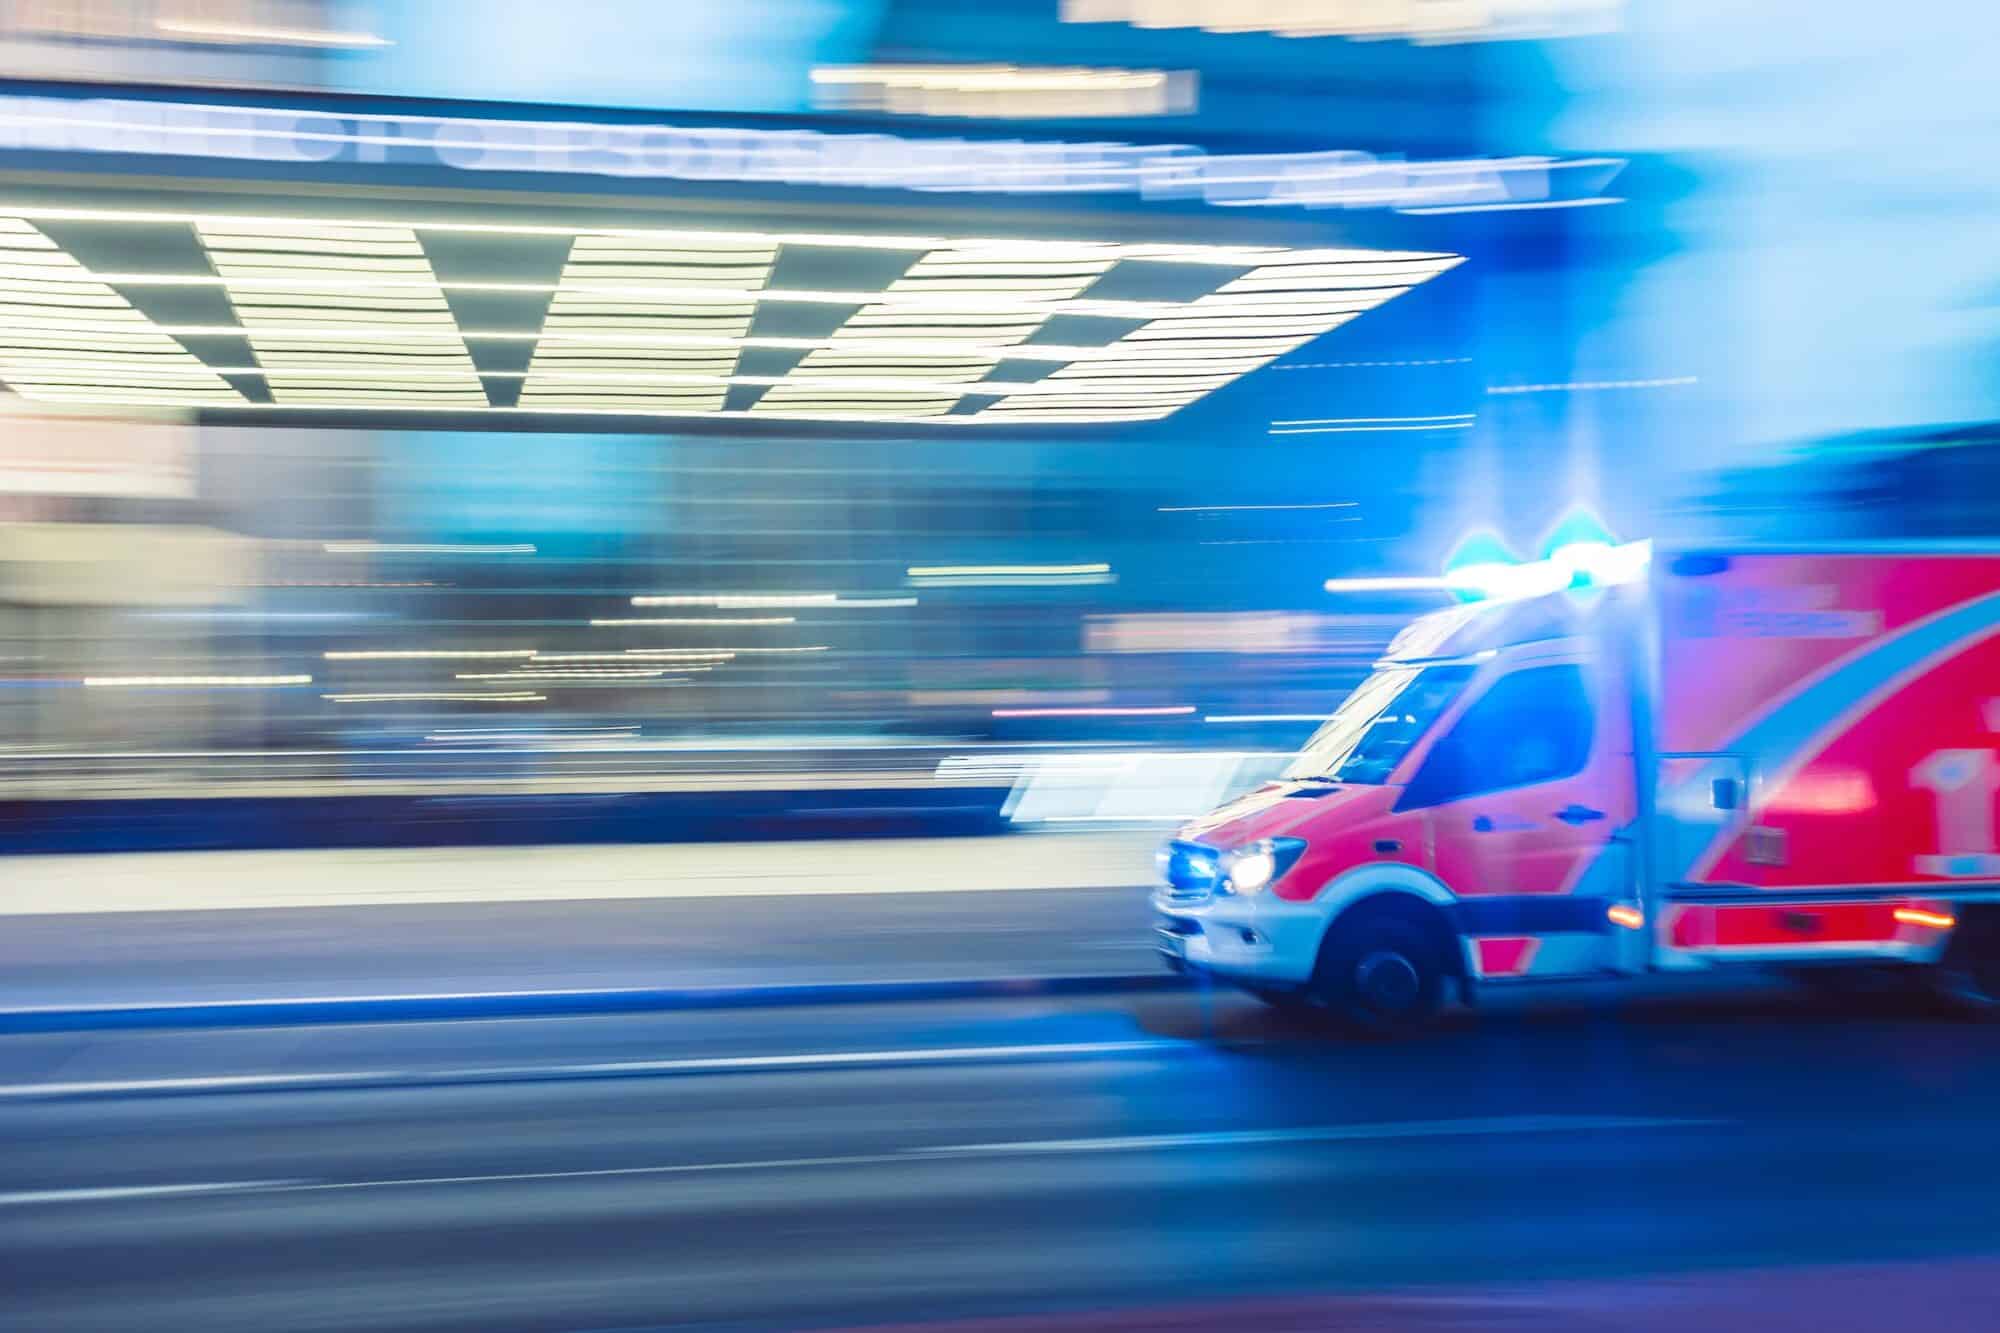 An ambulance speeds by quickly down a street.